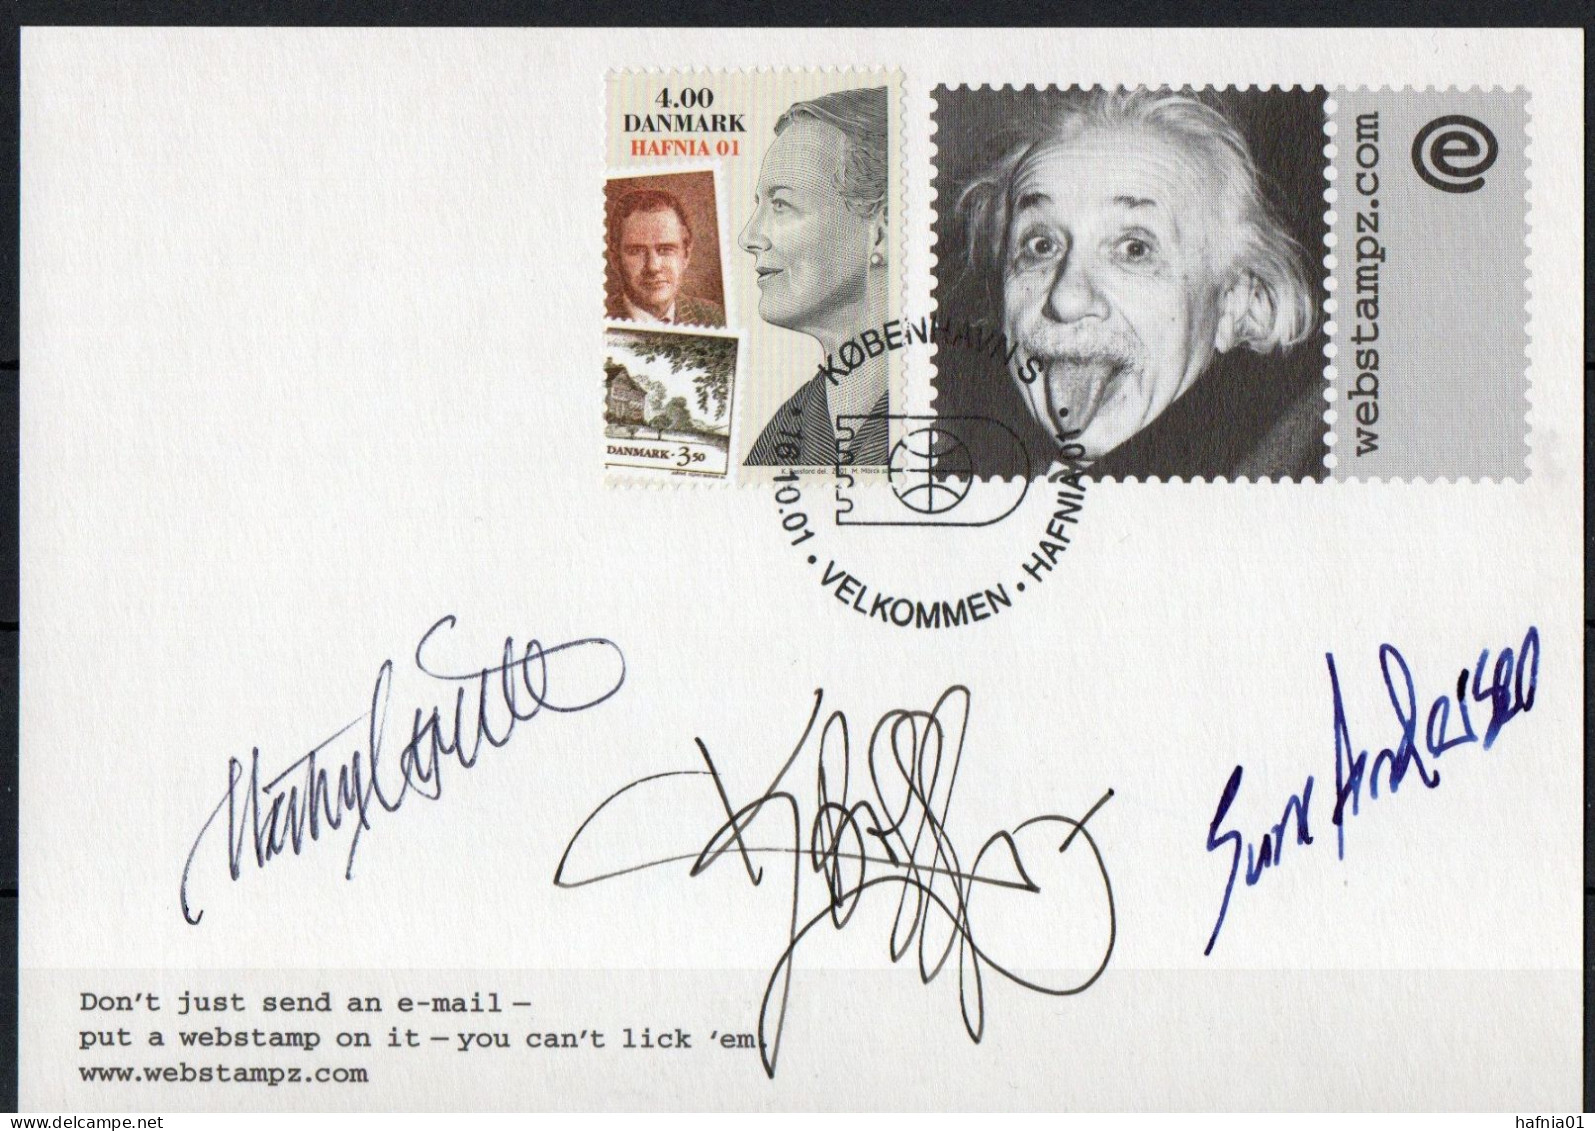 Martin Mörck. Denmark 2001. 150 Anniv Danish Stamps. Michel 1287on Card. Special Cancel. Signed. - Lettres & Documents